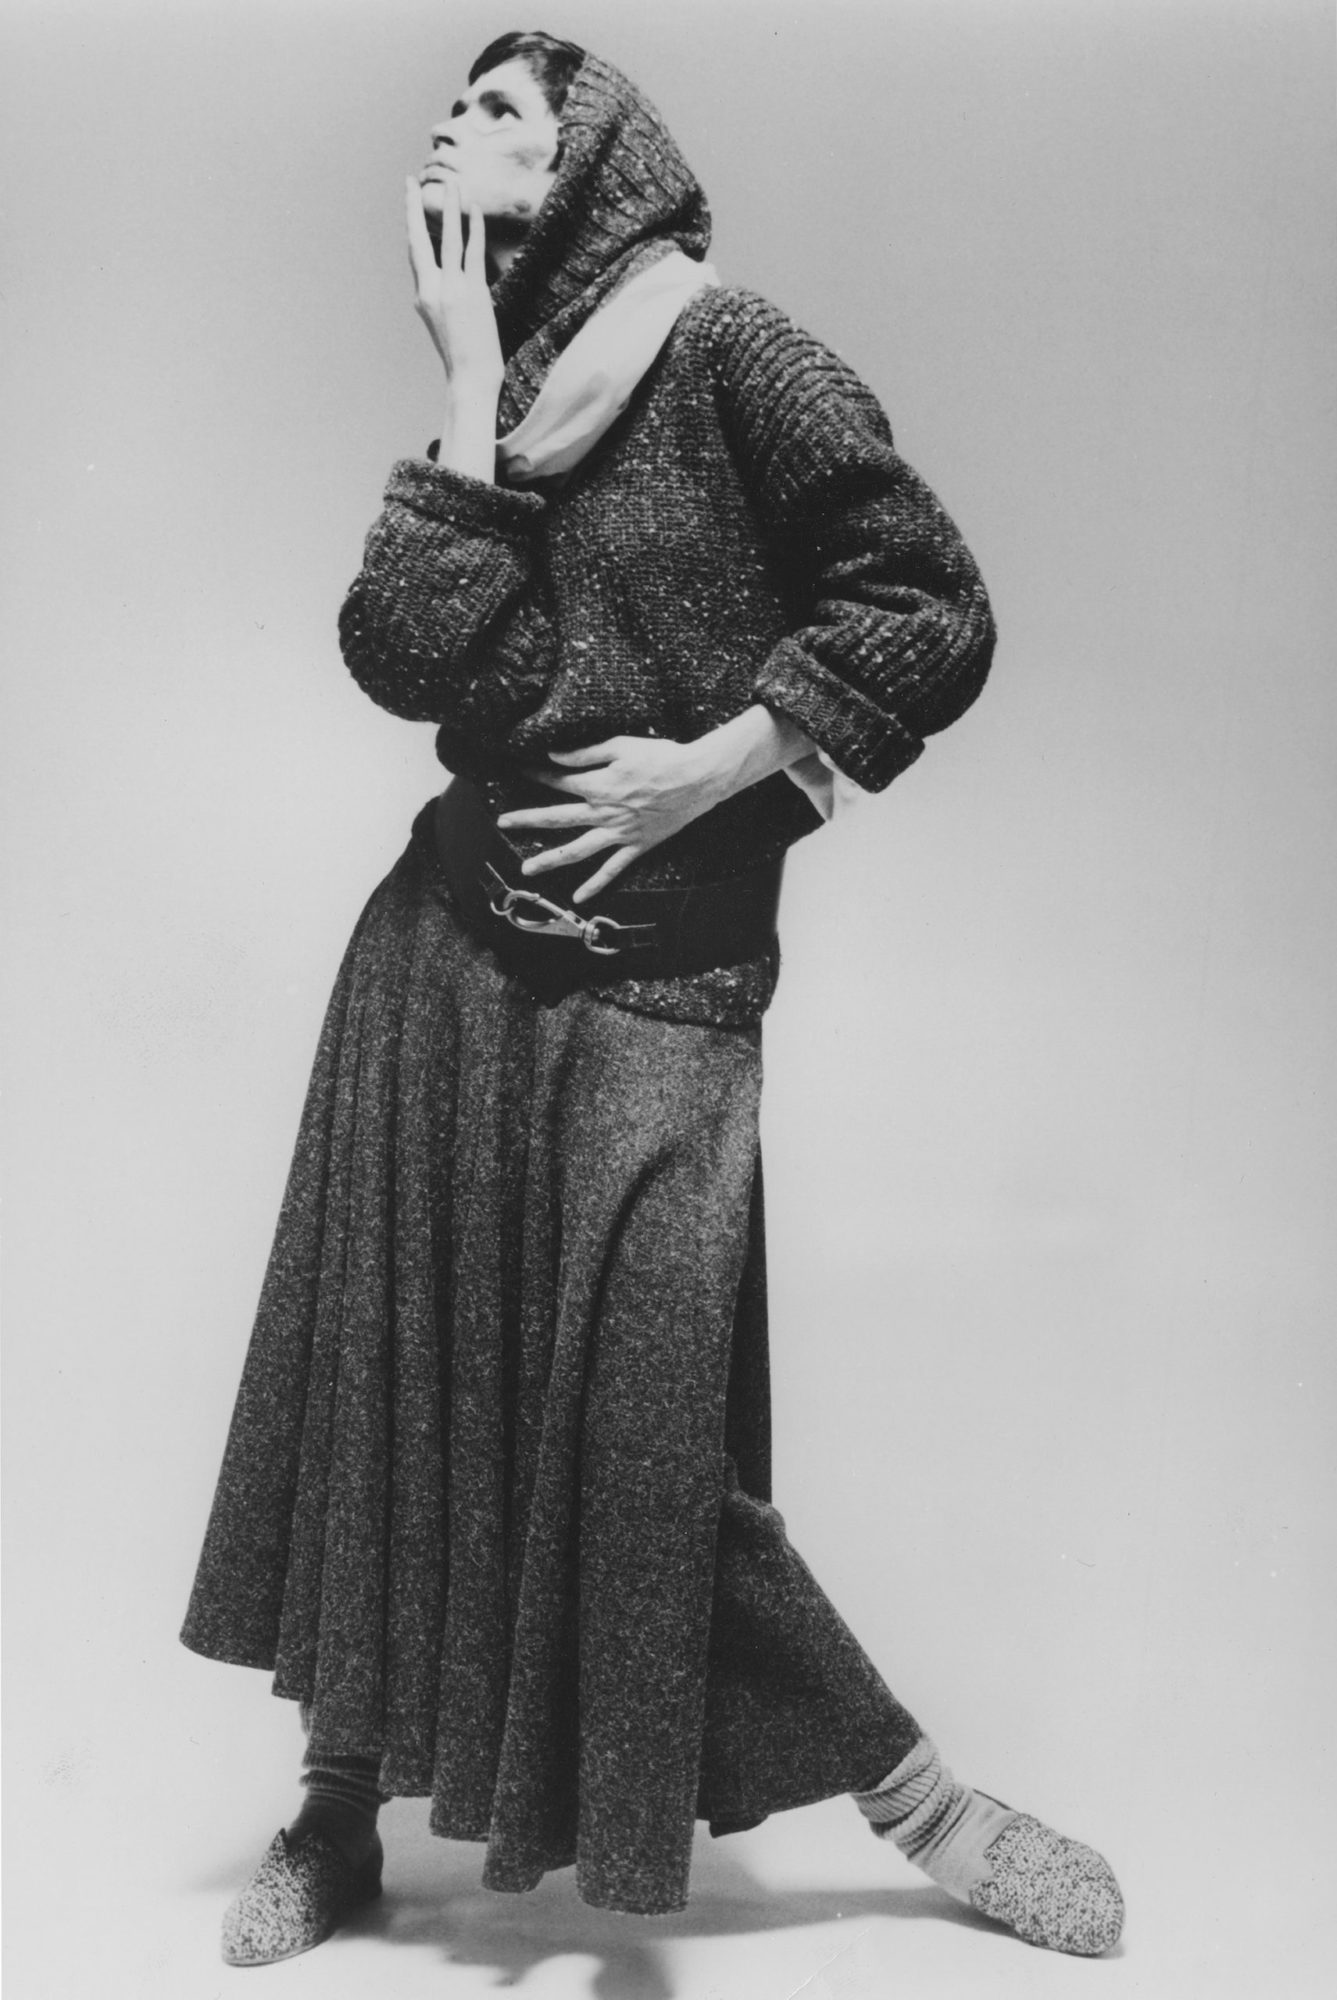 Grayscale image of a model posing dramatically wearing a dark hooded sweater, long wool skirt, large decorative belt, thick socks, and flat shoes